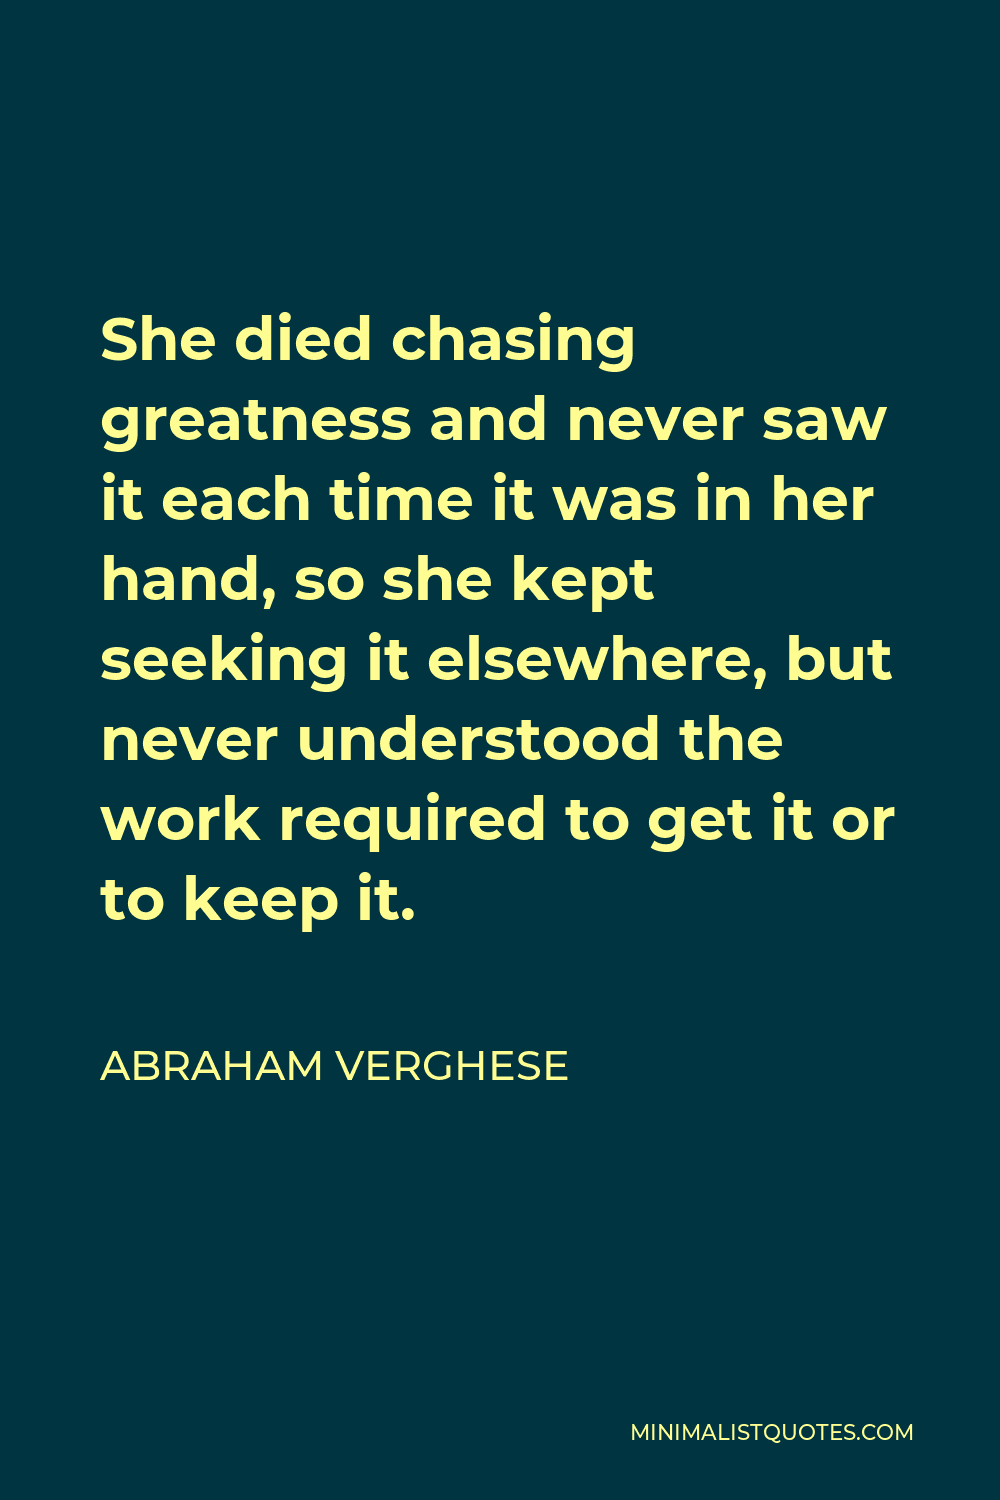 Abraham Verghese Quote - She died chasing greatness and never saw it each time it was in her hand, so she kept seeking it elsewhere, but never understood the work required to get it or to keep it.